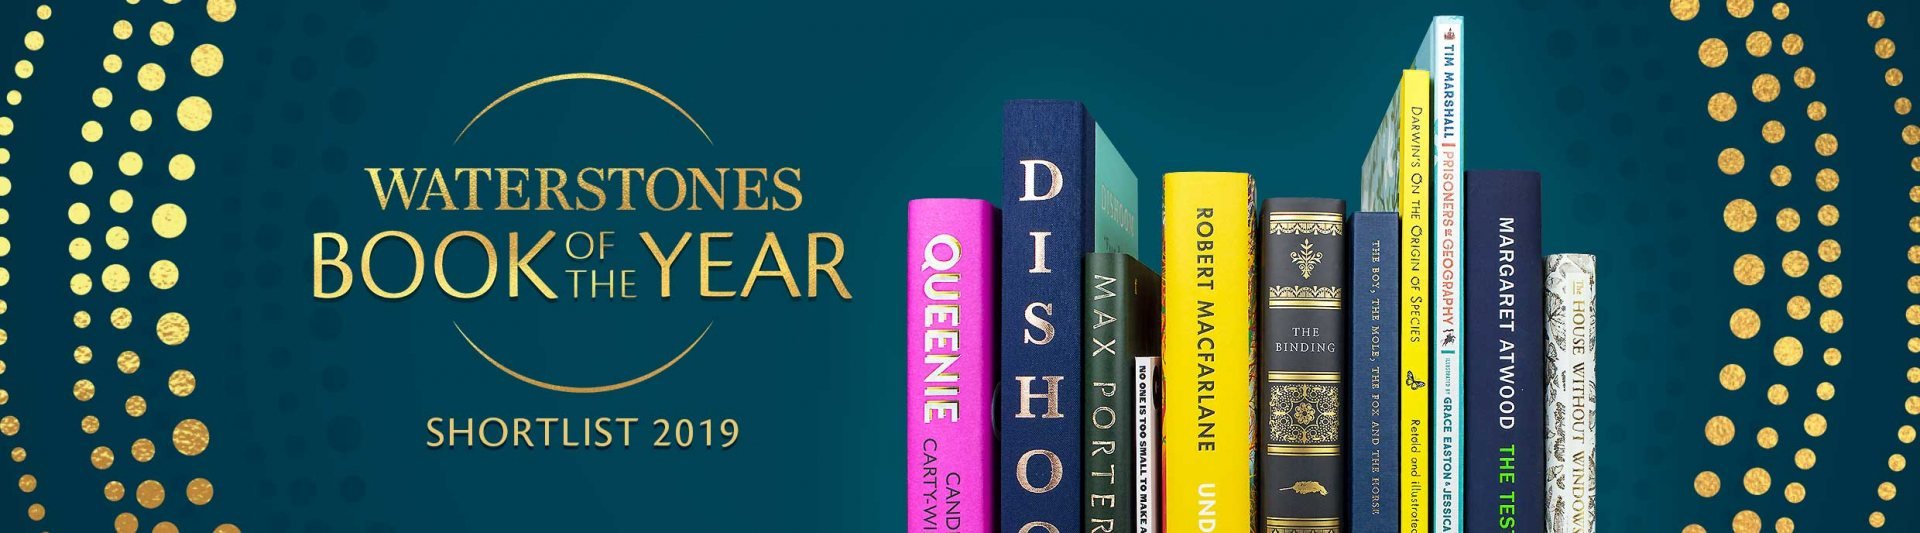 Waterstones Book of the Year 2018